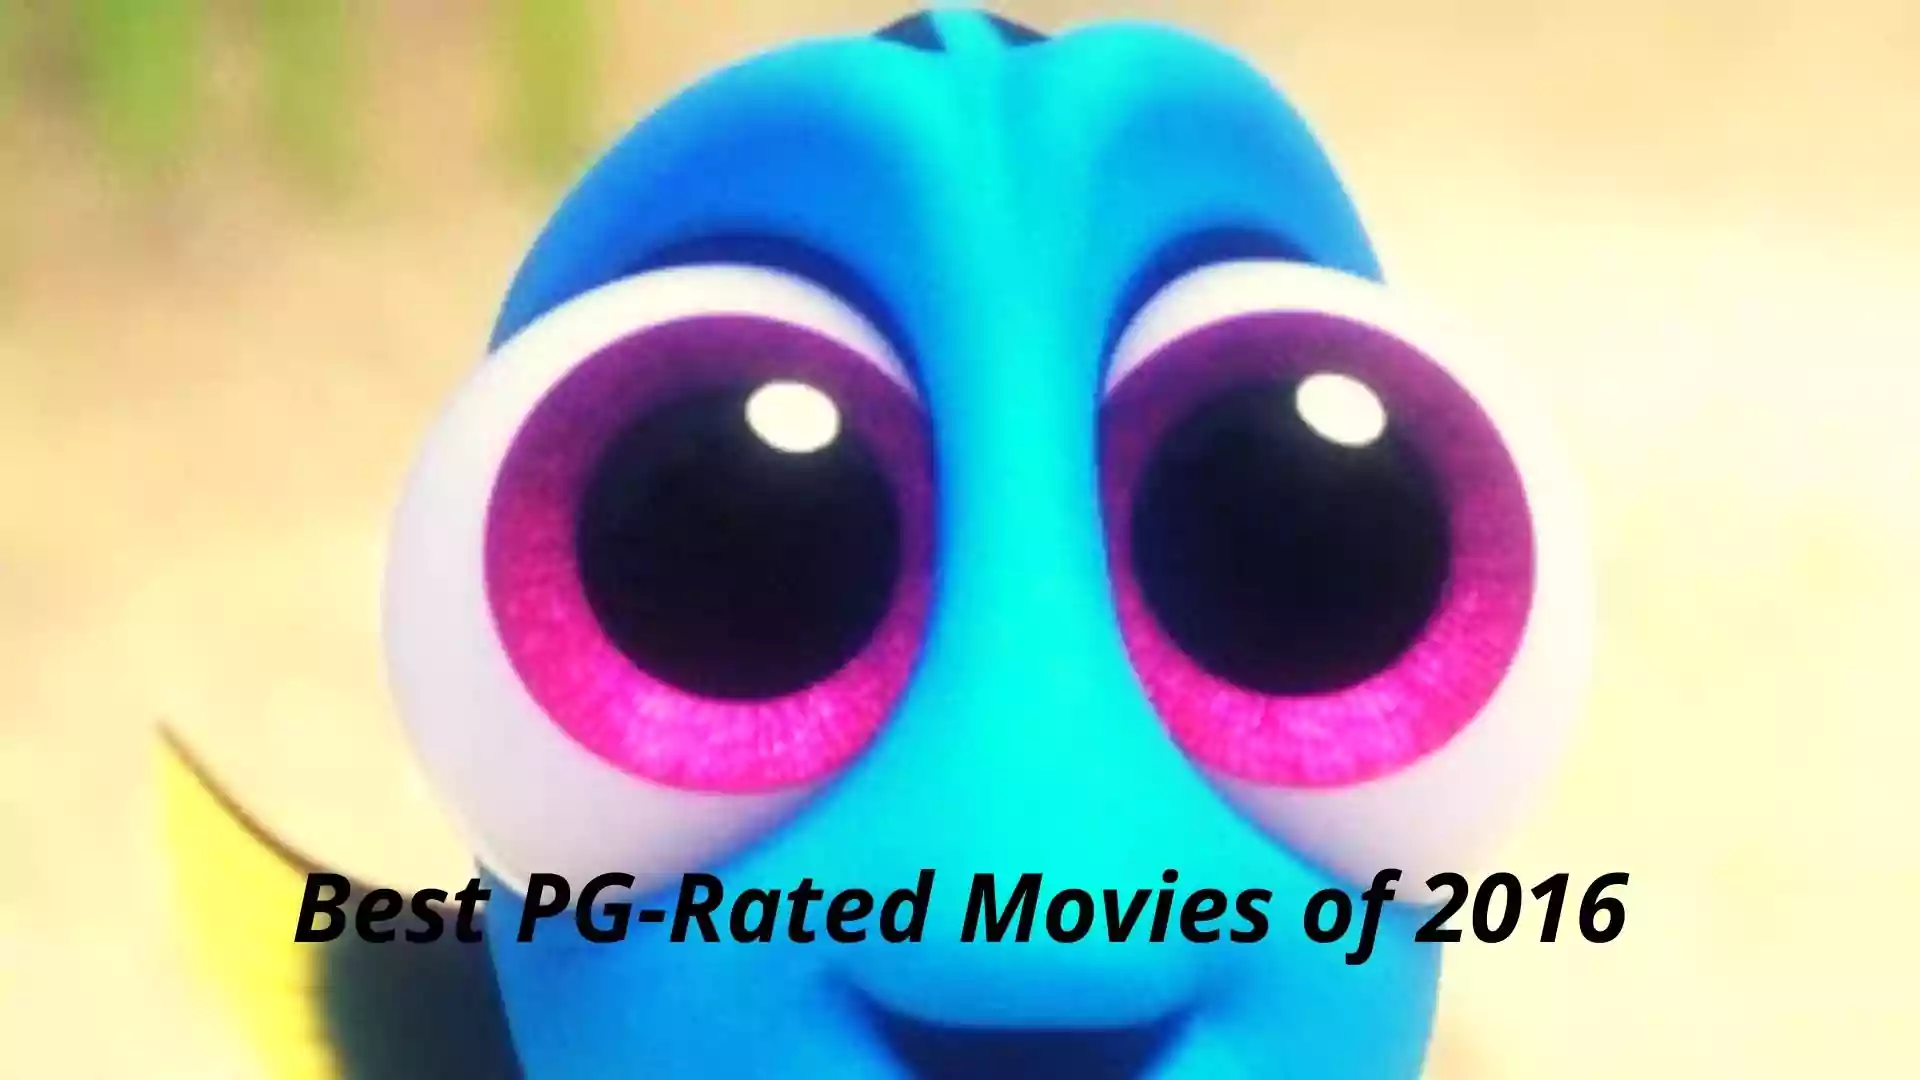 Best PG-Rated Movies of 2016